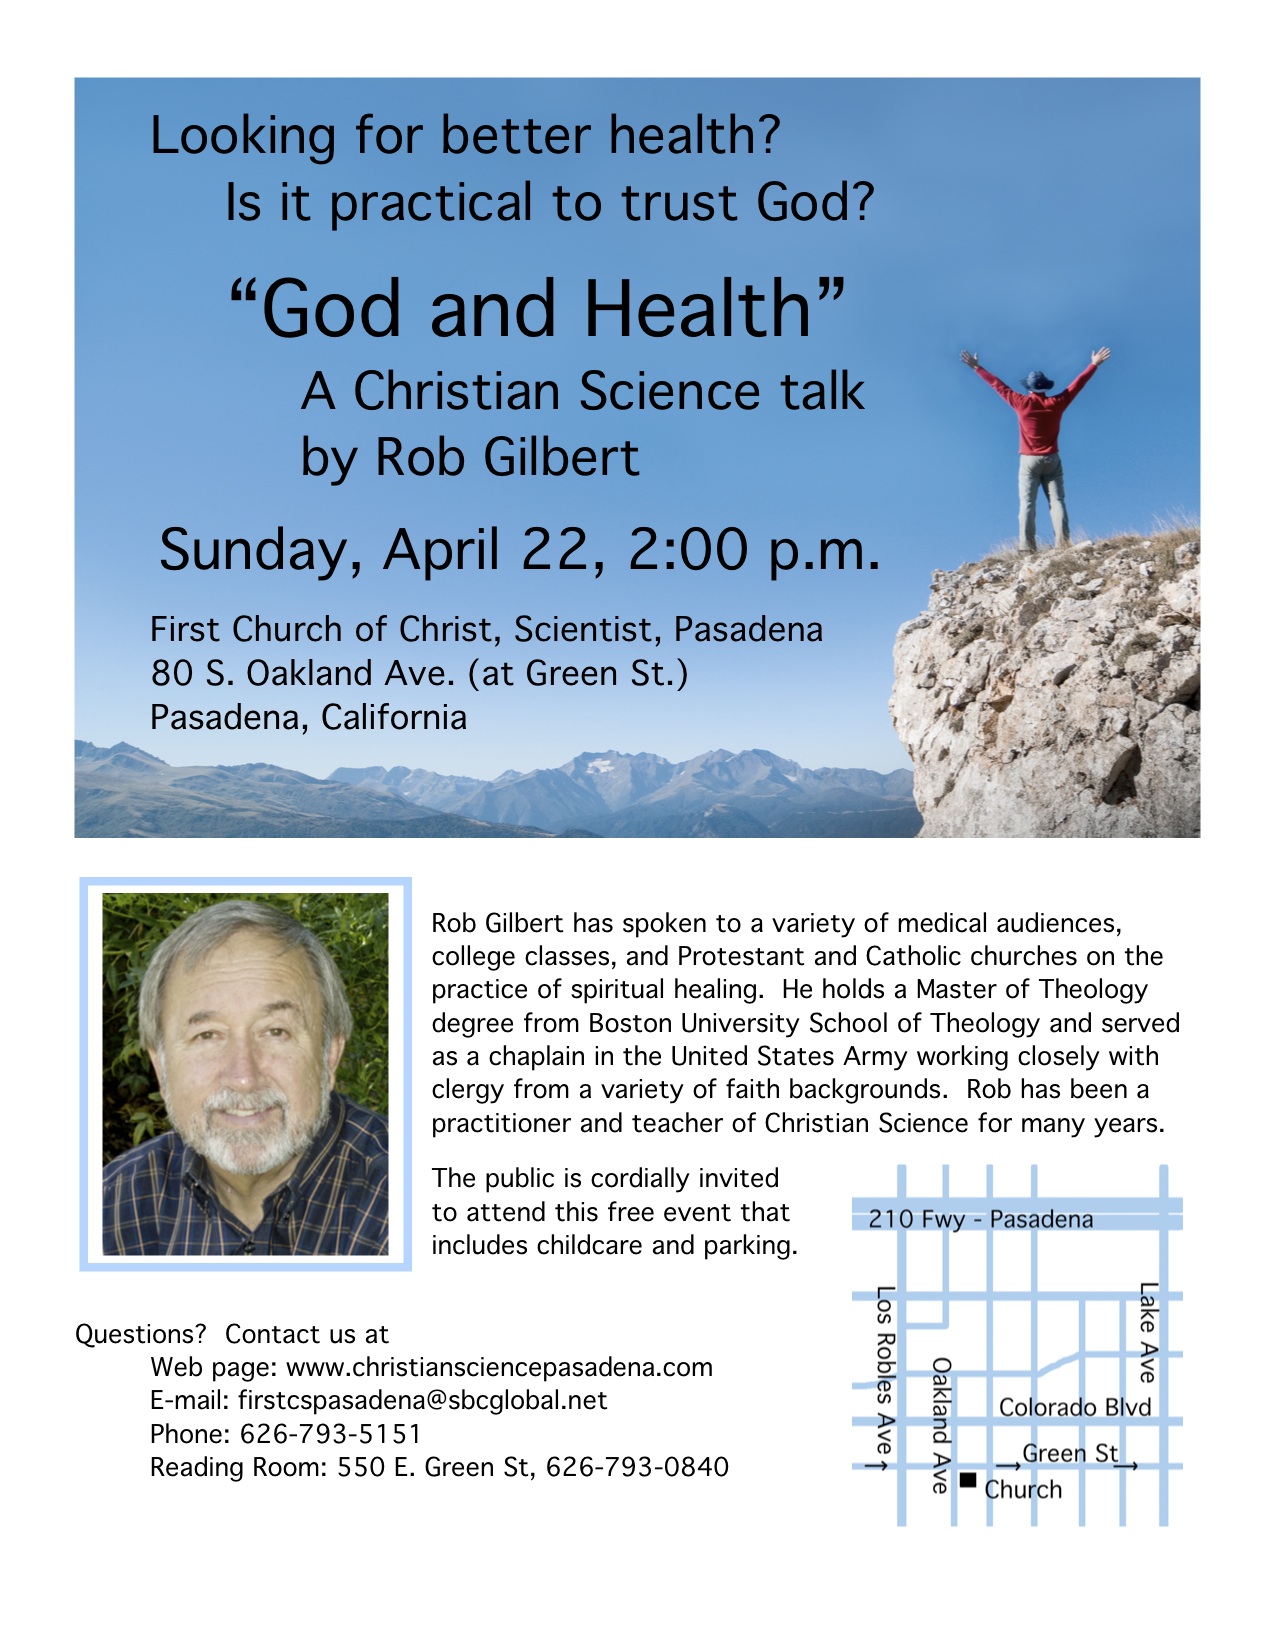 God and Health” A Christian Science talk by Rob Gilbert Sunday, April 22, 2:00 p.m.